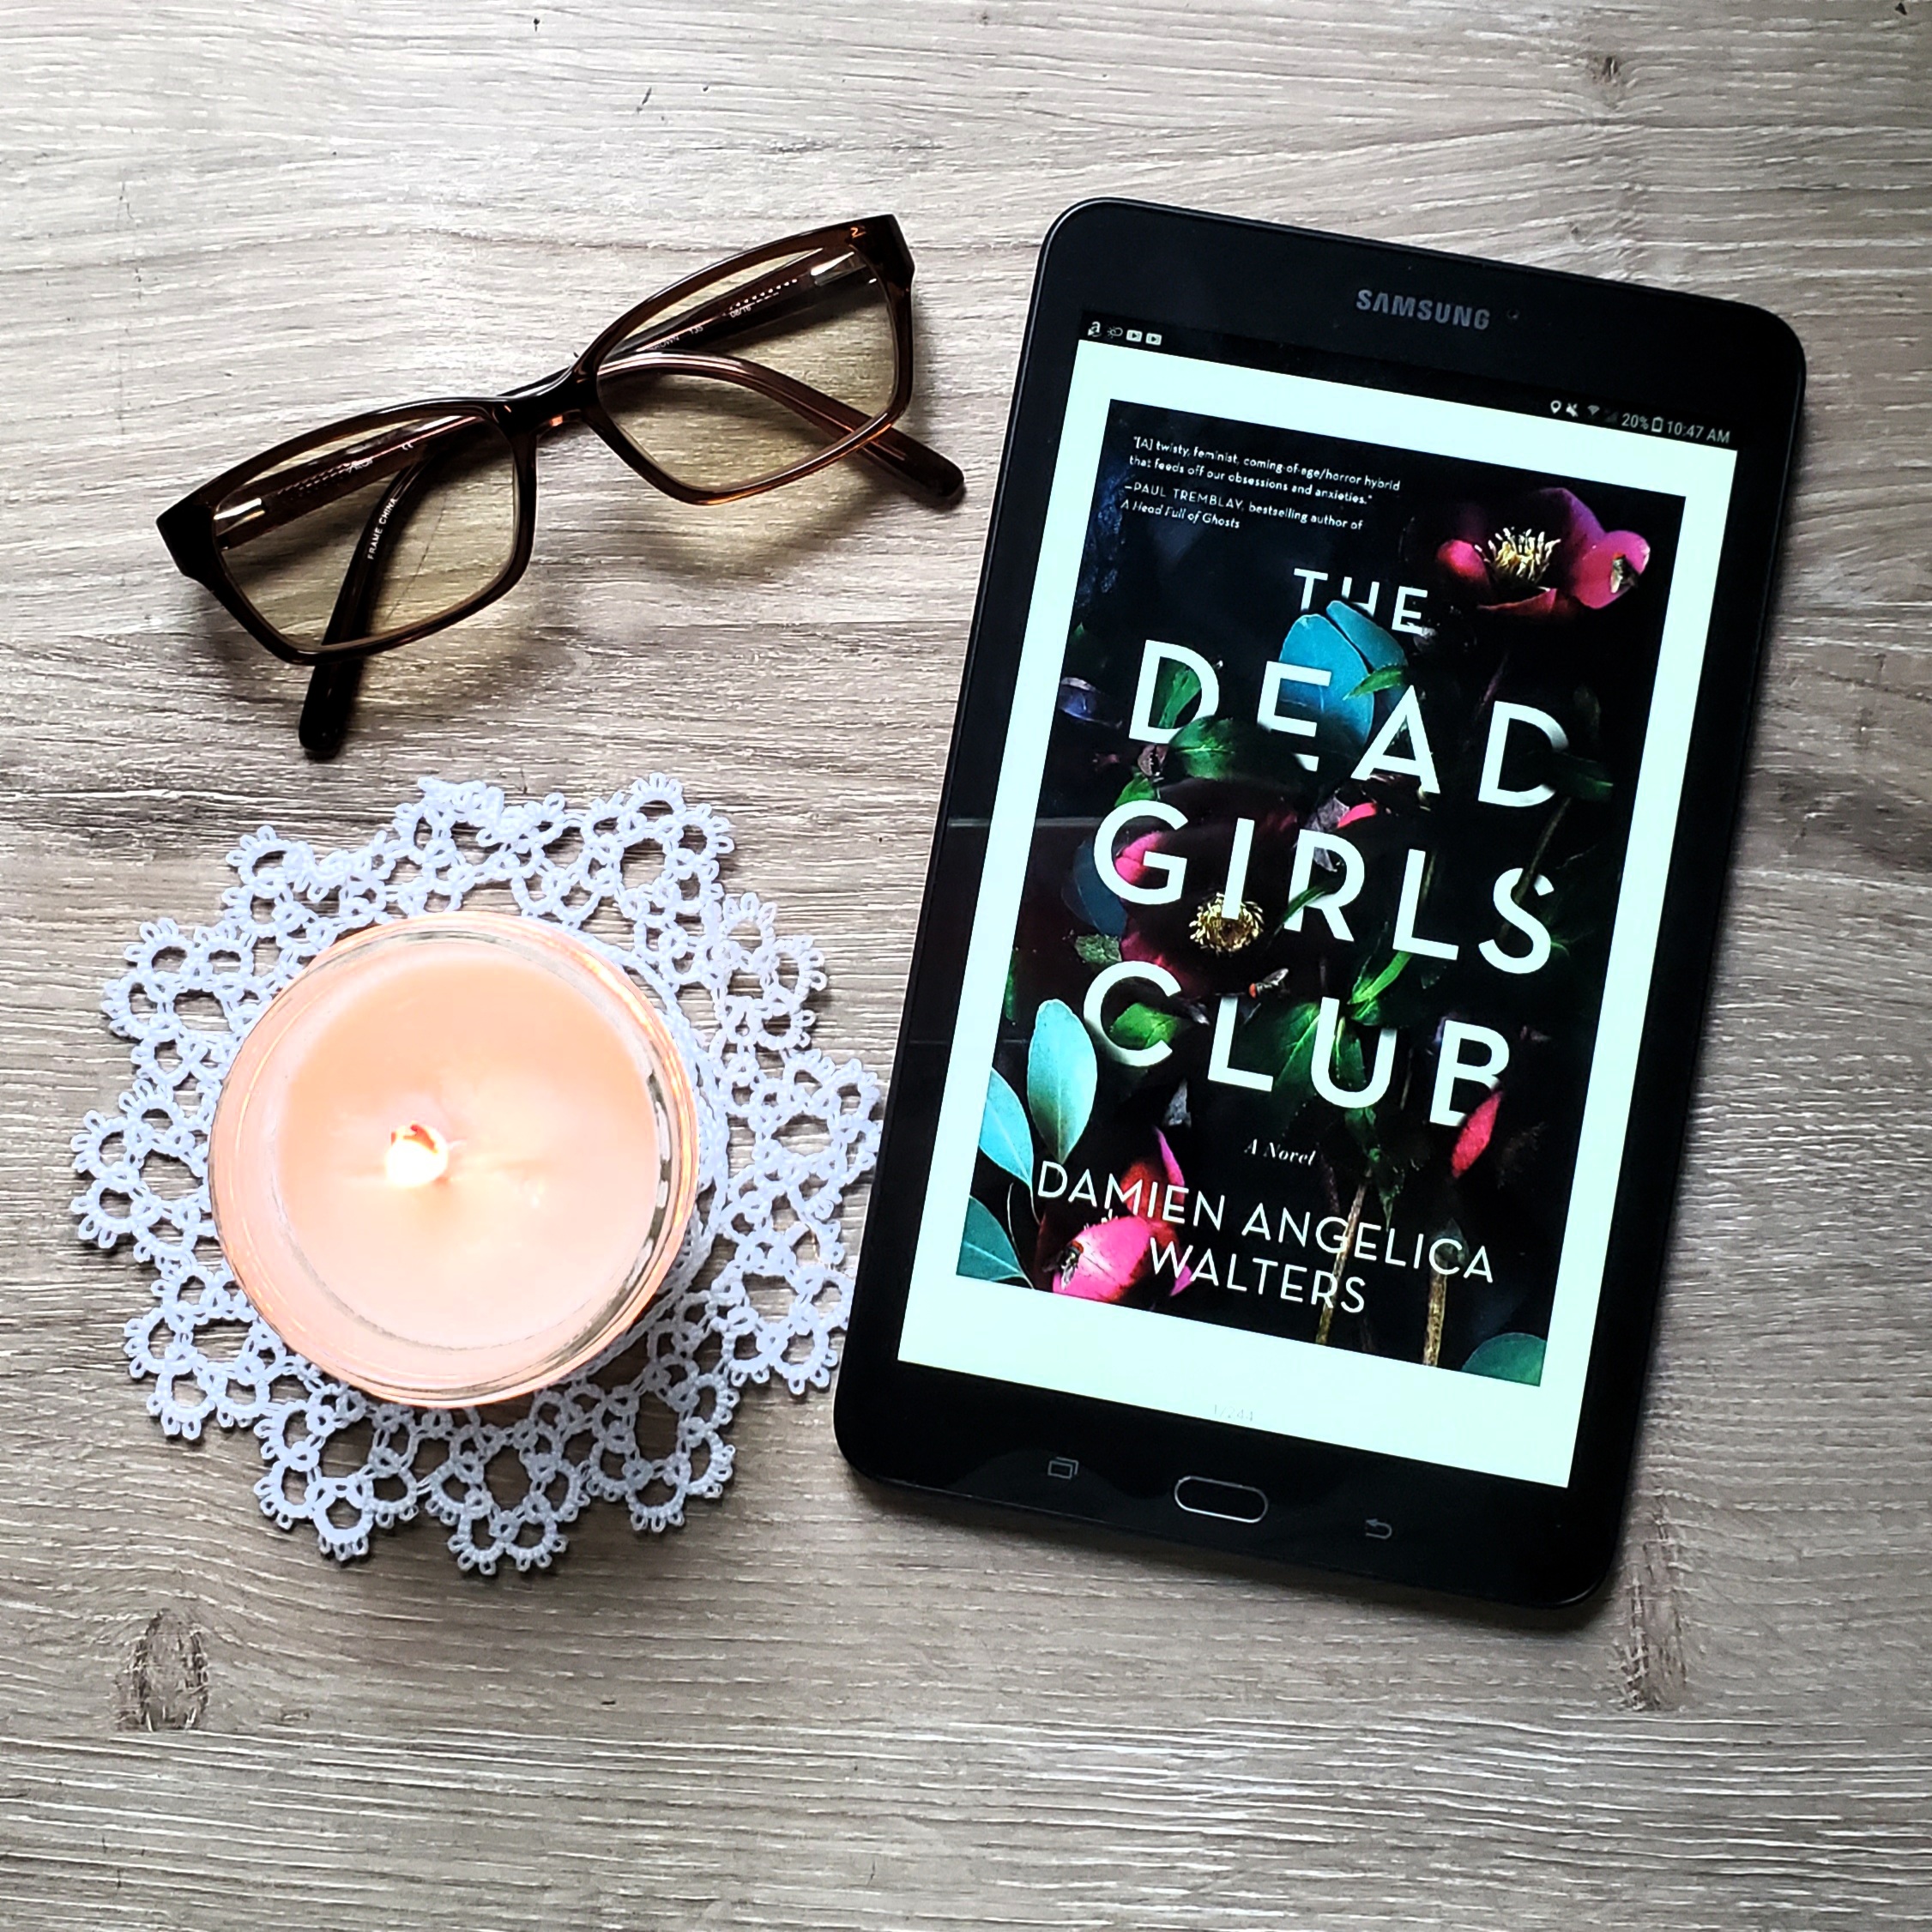 Book Review of THE DEAD GIRLS CLUB